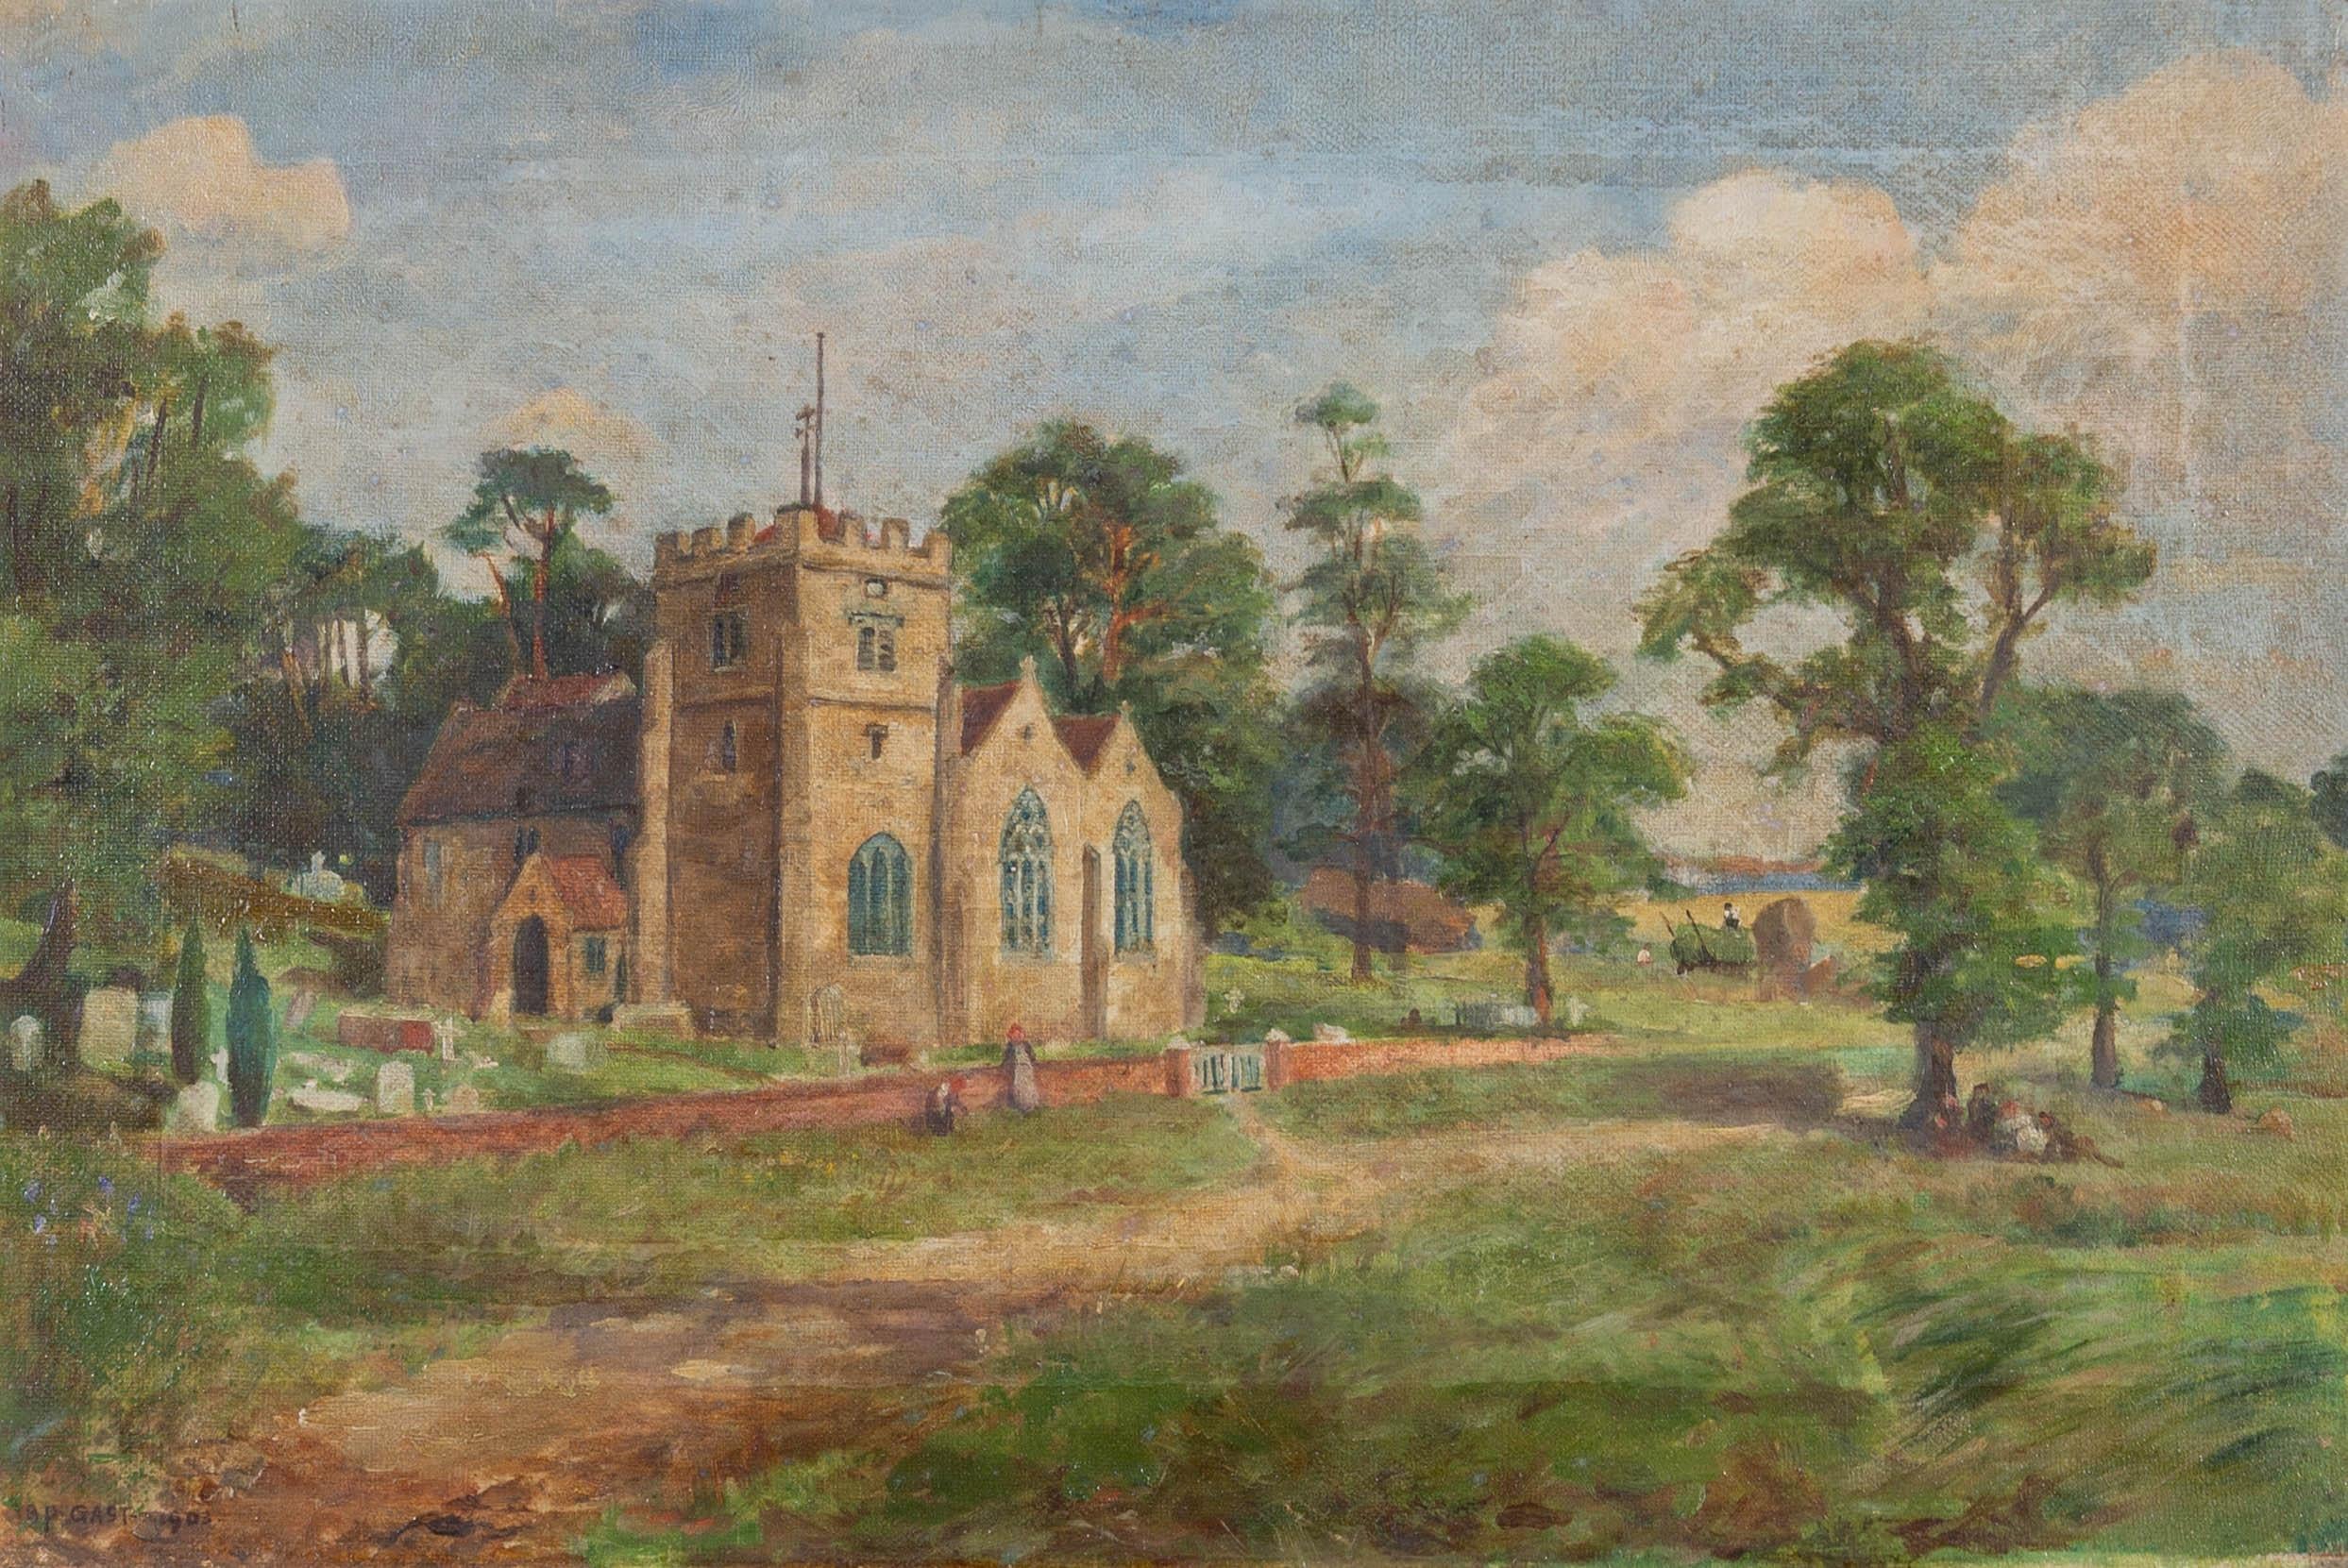 A charming oil painting, depicting a rural scene with a church and figures nearby. Signed and dated to the lower left-hand corner. Presented in a gilt-effect slip and in an ornate, gilt-effect frame, as shown. On canvas on stretchers.